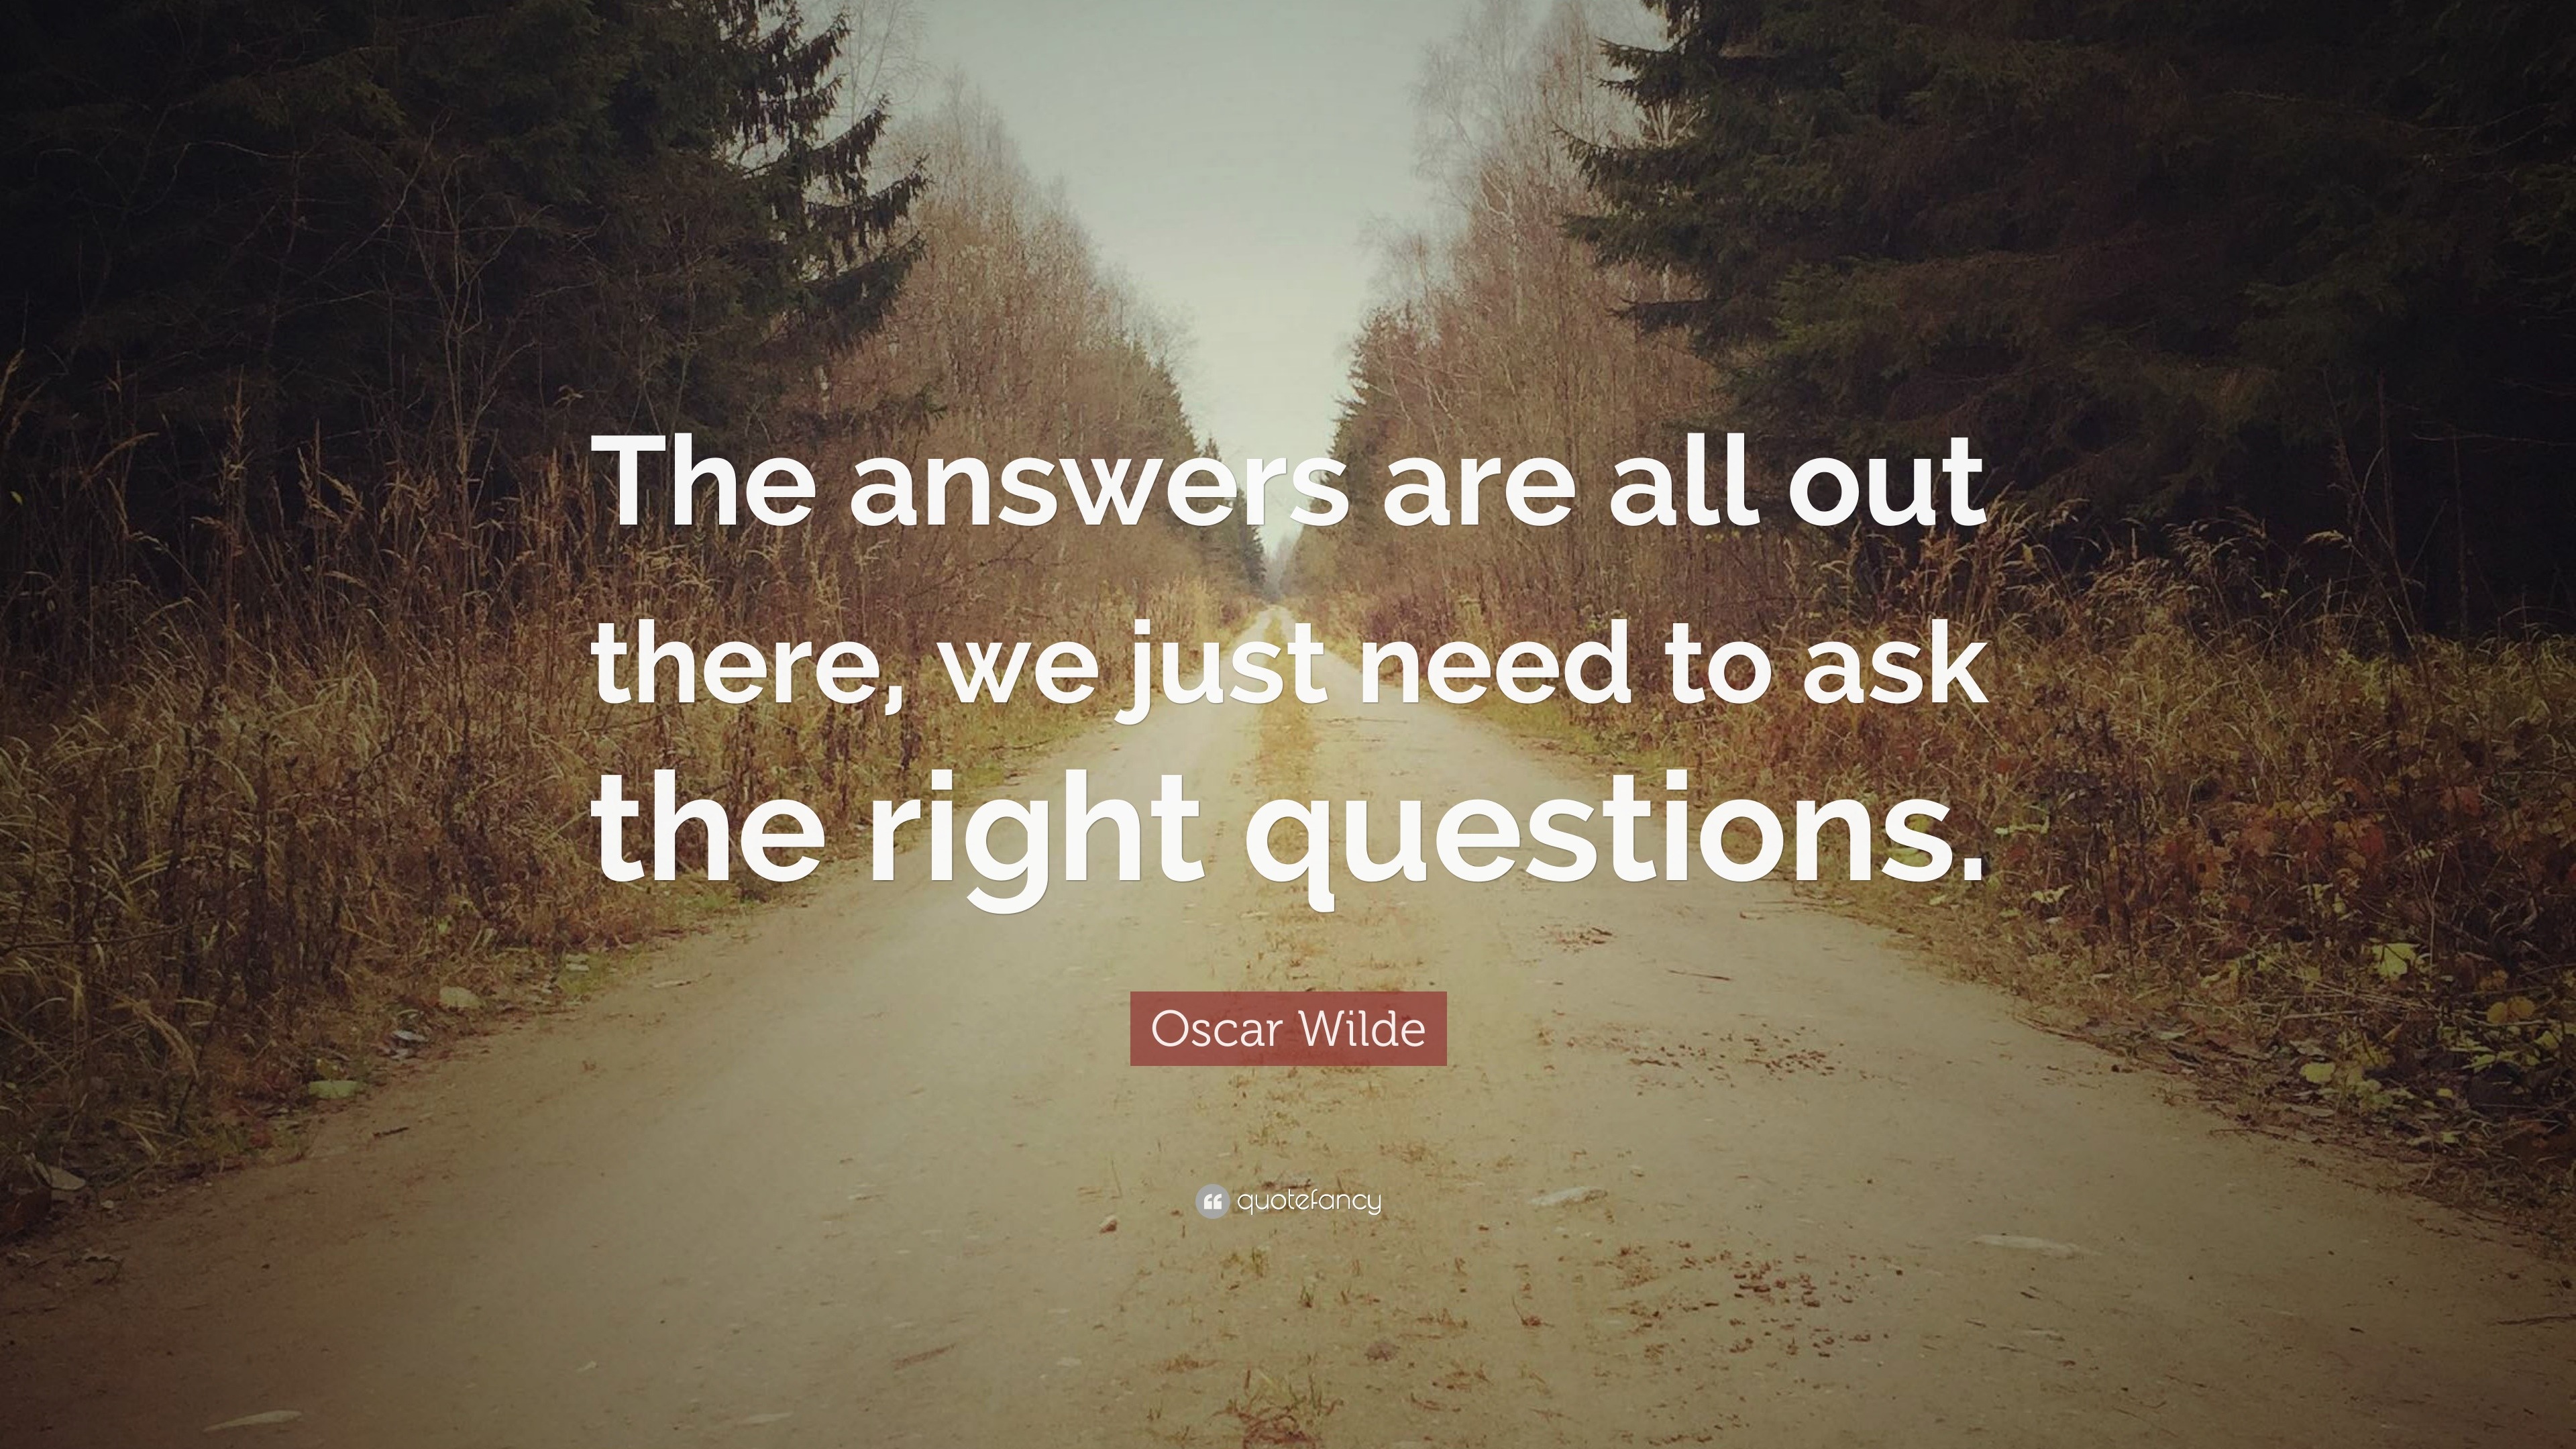 Oscar Wilde Quote: “The answers are all out there, we just need to ask